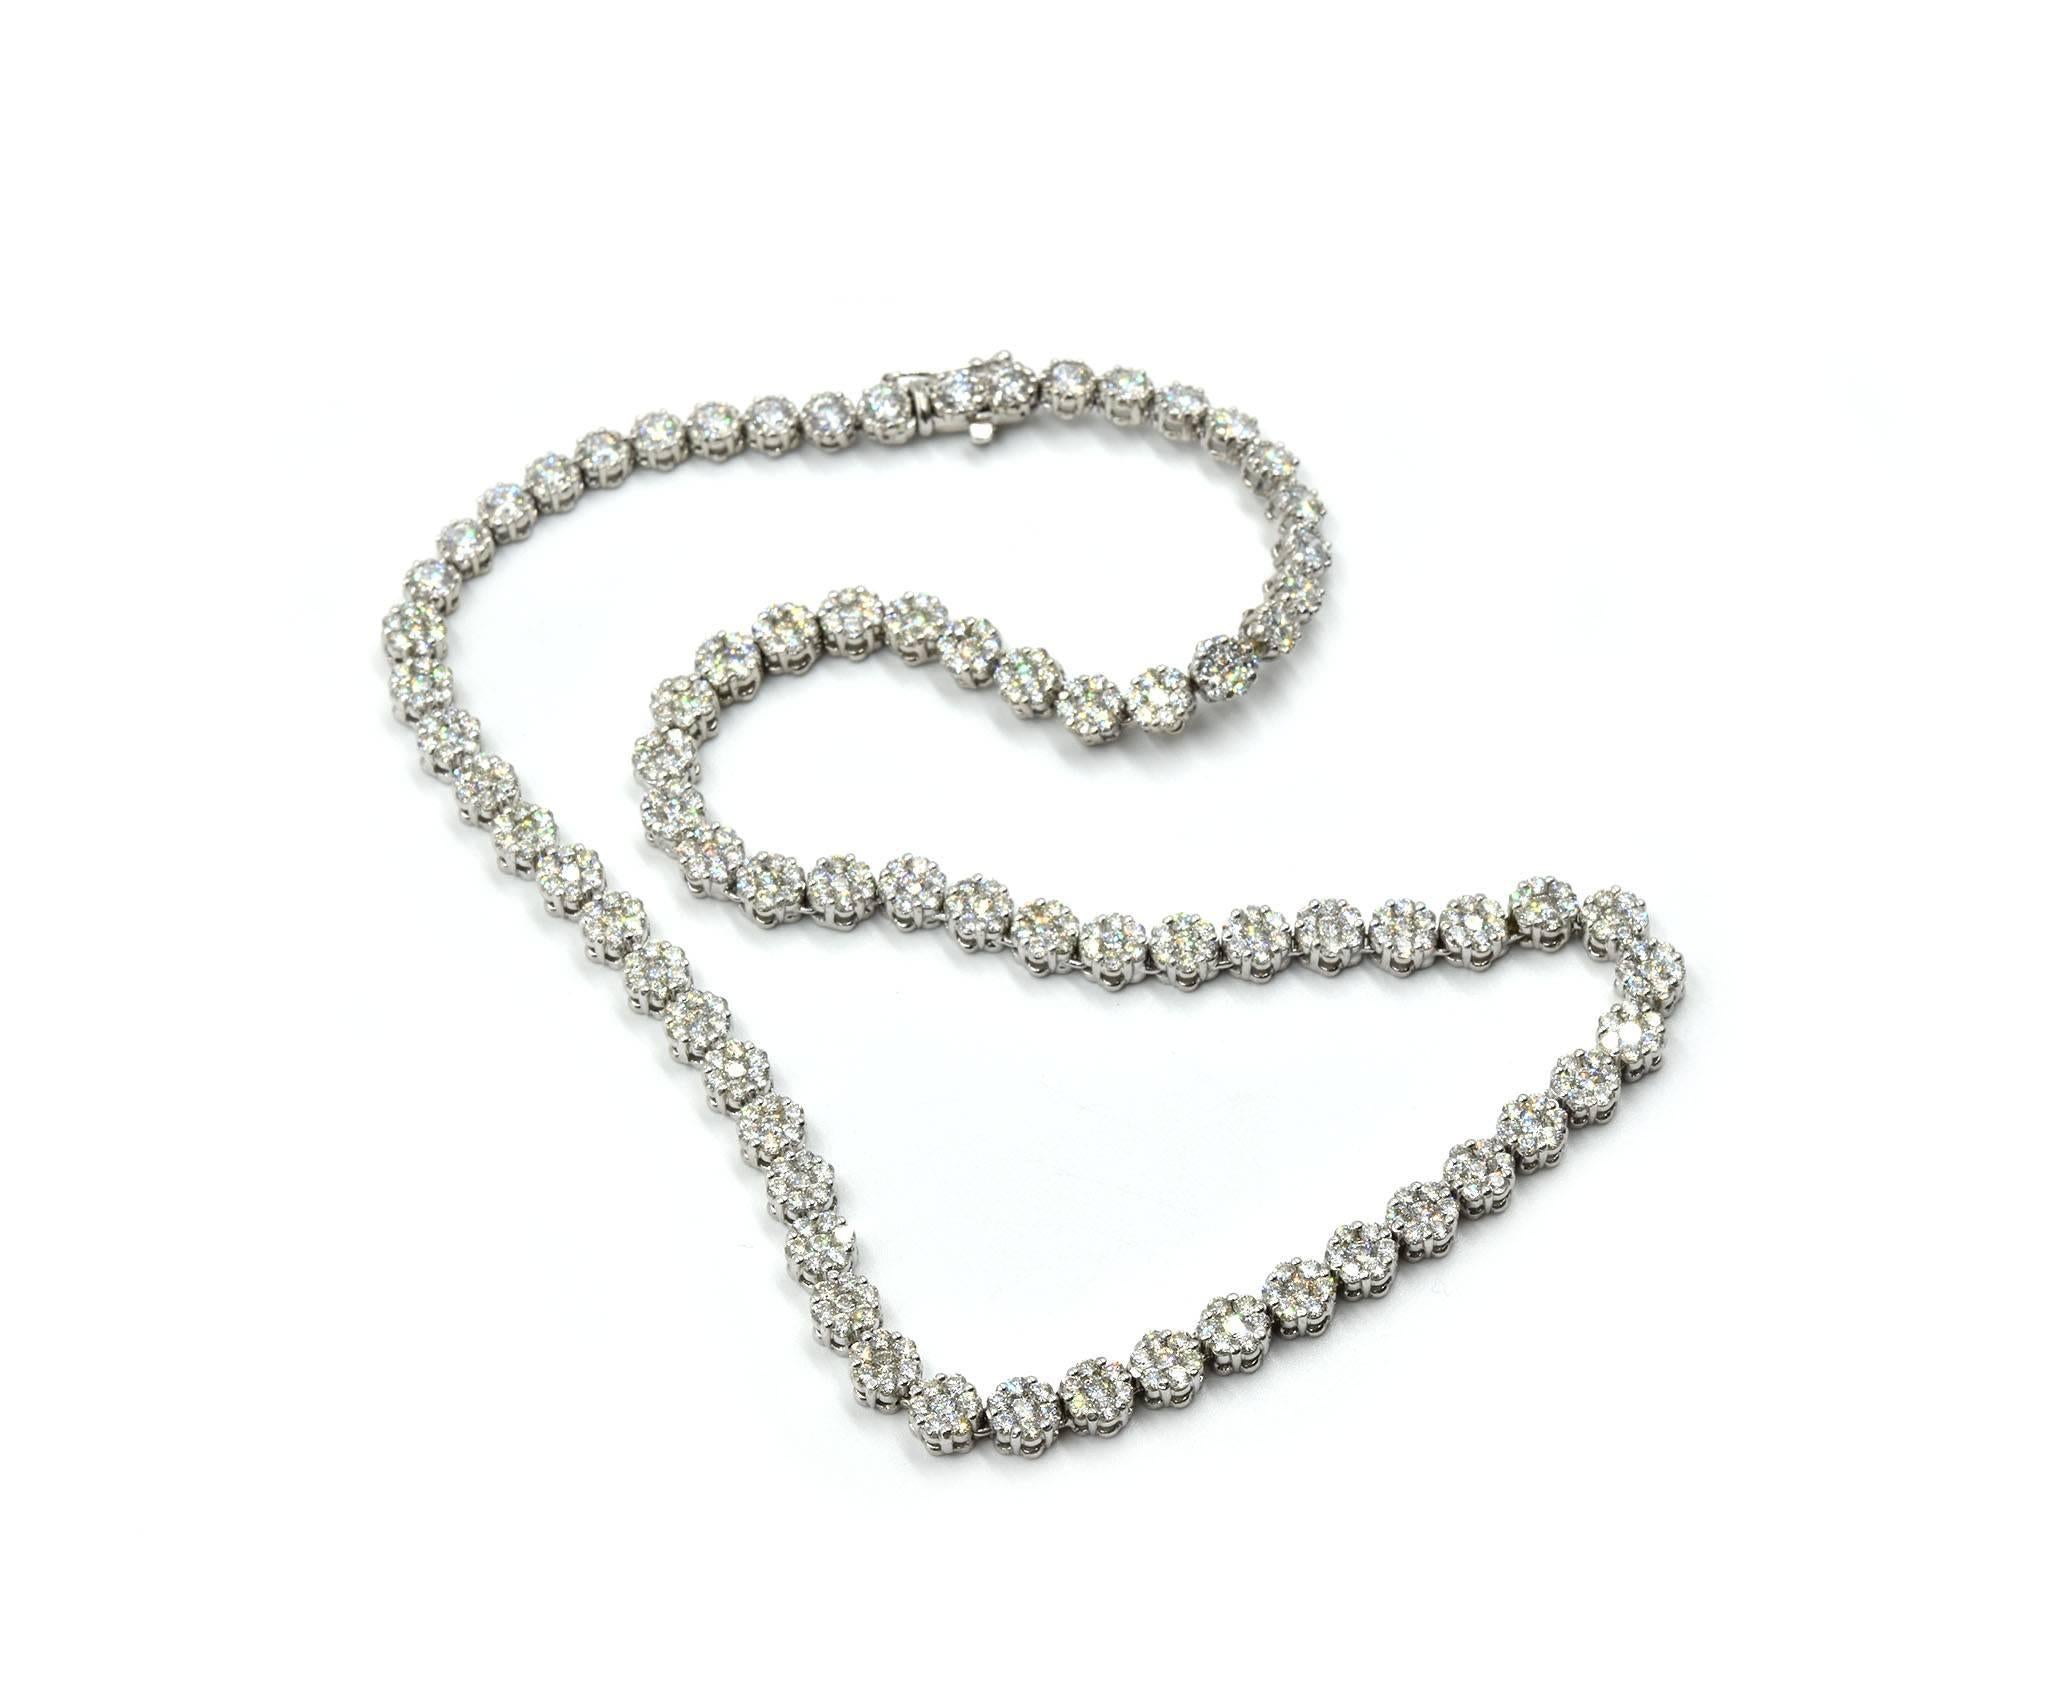 Designer: custom design
Material: 14k white gold
Diamonds: 14.00 carat total weight
Dimensions: necklace is 16-inches long and graduates in width up to 1/4th an inch
Weight: 35.80 grams
